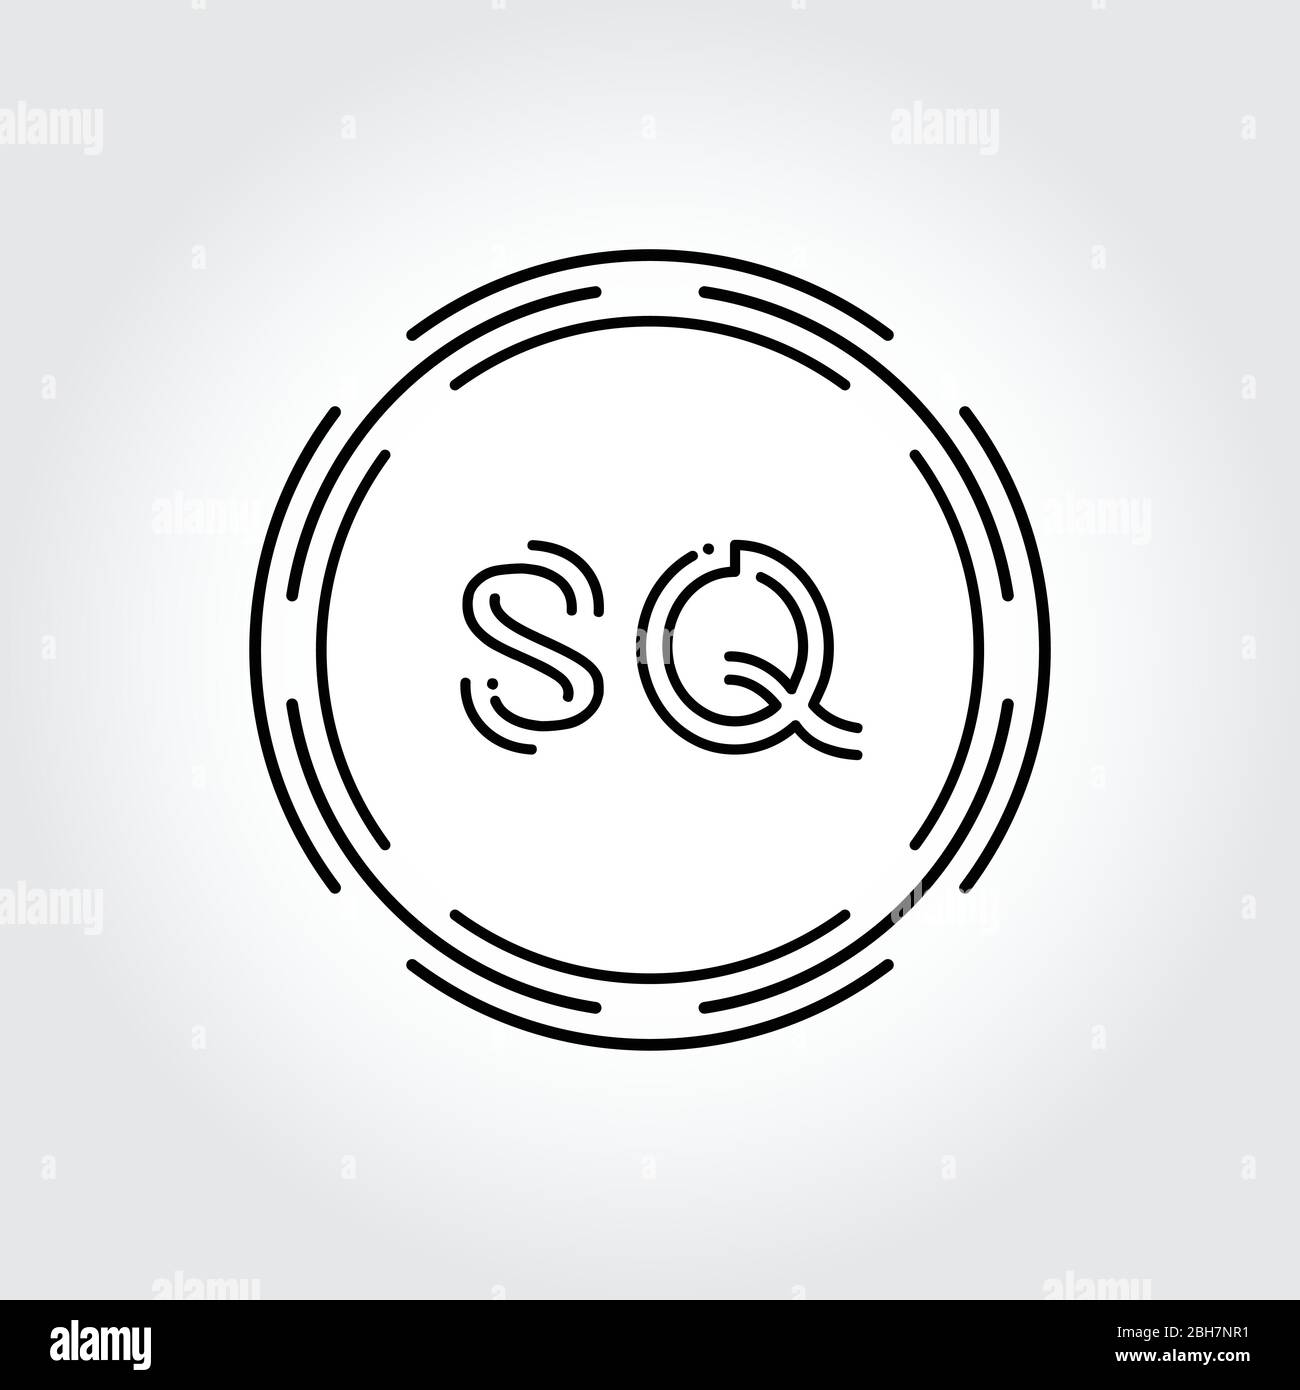 Initial SQ Logo Design Creative Typography Vector Template. Digital Abstract Letter SQ Logo Vector Illustration Stock Vector